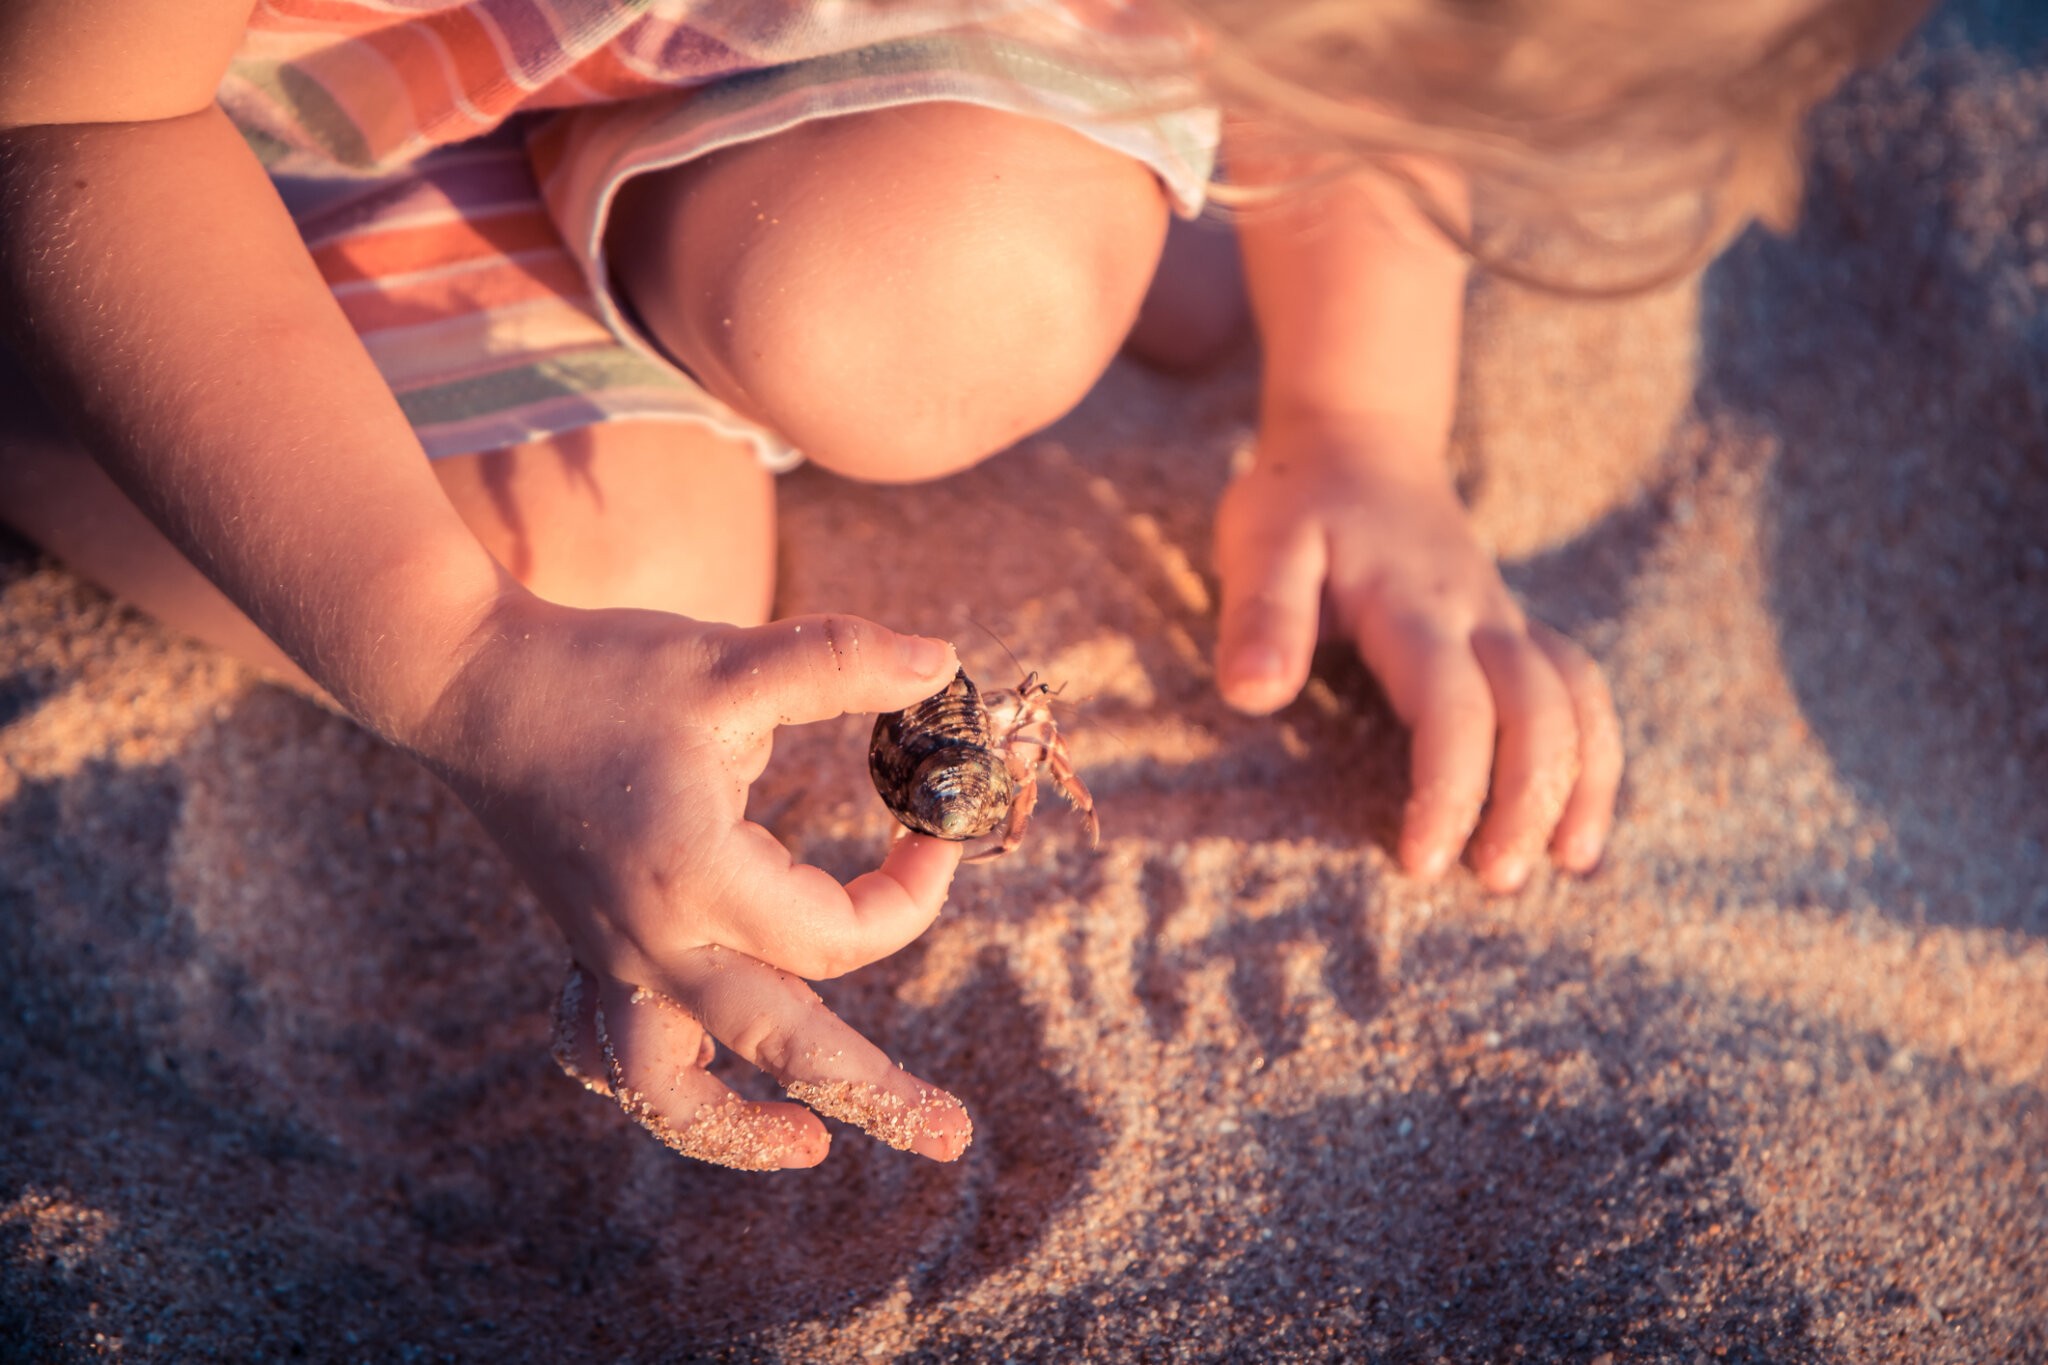 Curious child kids playing on beach with hermit crab during summer vacation concept childhood curiosity lifestyle